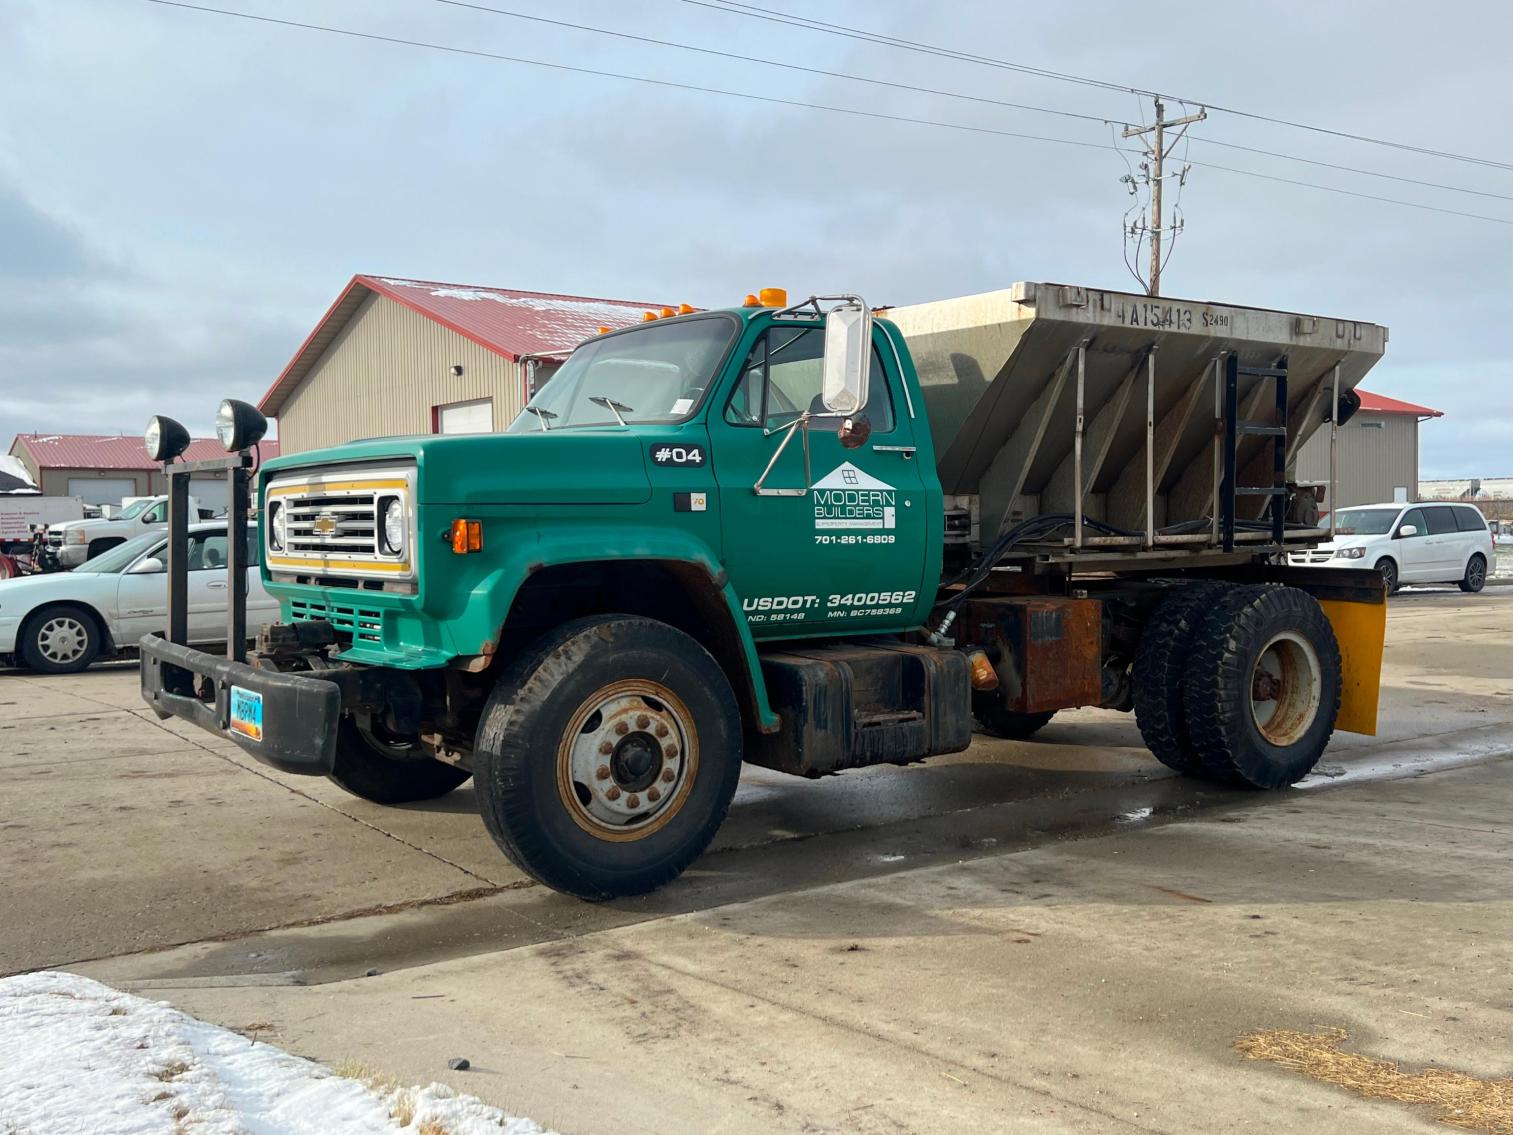 1987 Chevy C6500 Salt/Sand Truck, 1999 Ford F350 with Plow, 1995 Crown Line Deck Boat